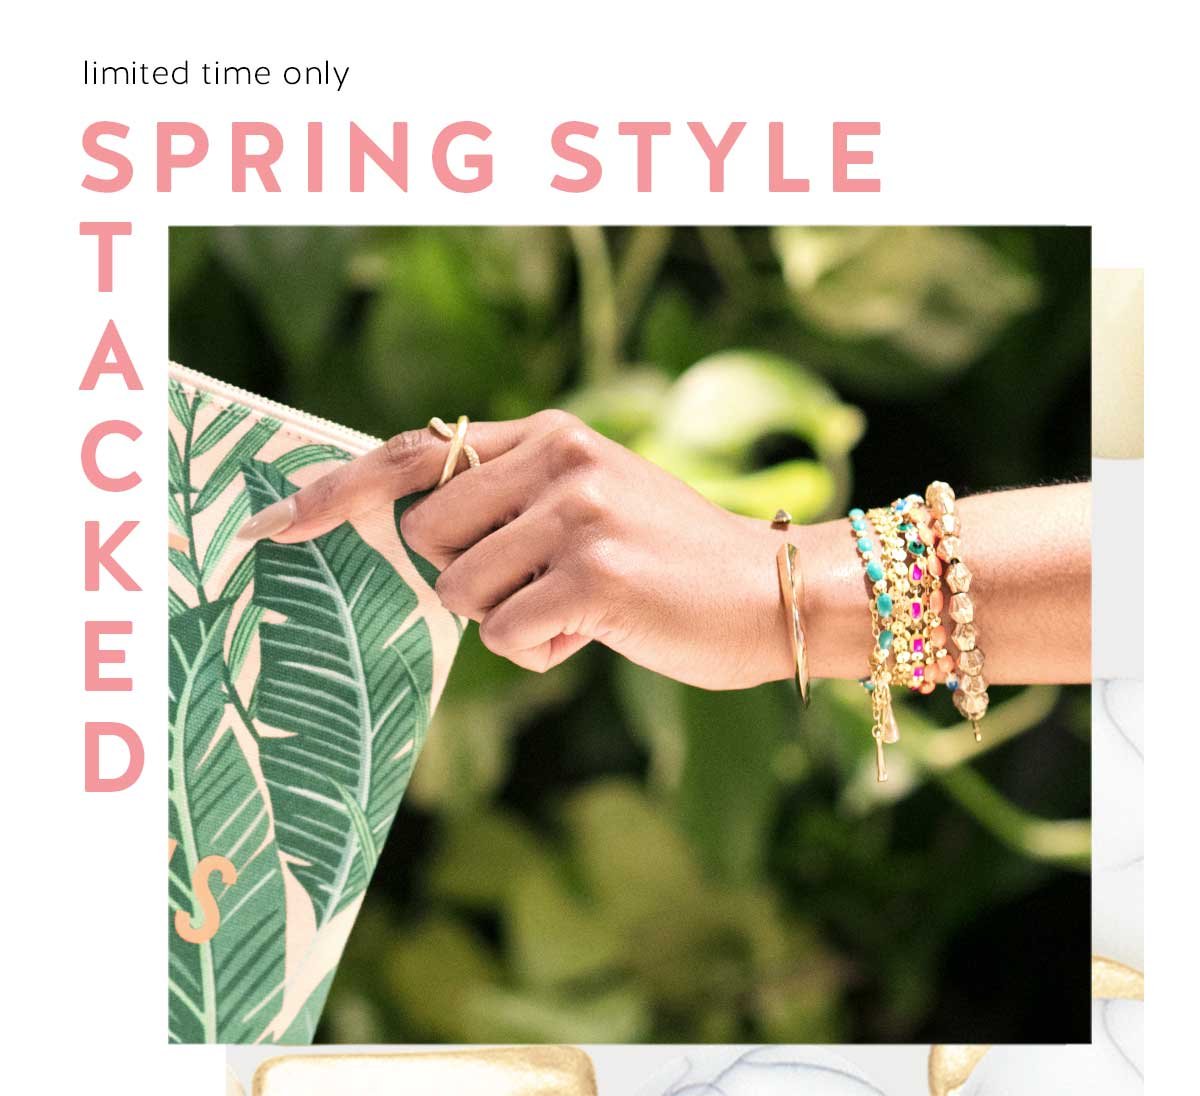 SPRING STYLE STACKED